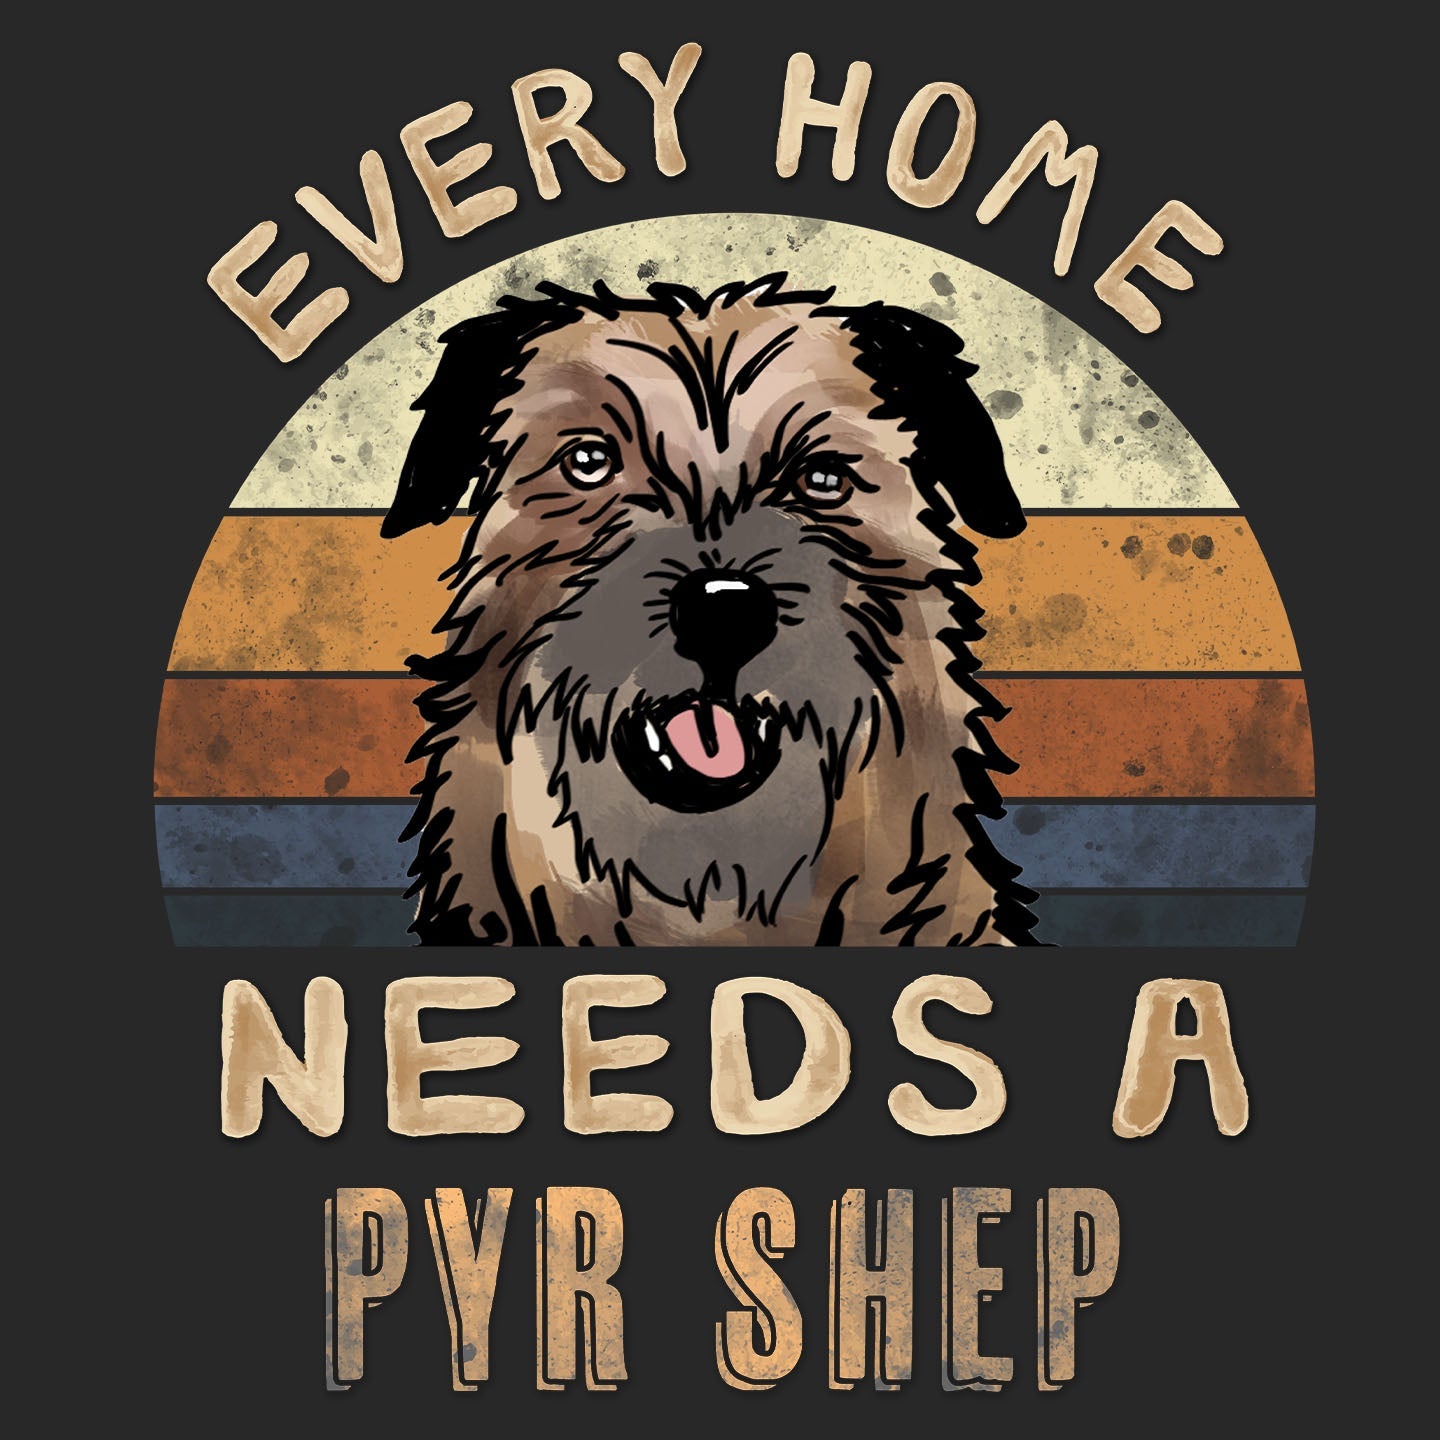 Every Home Needs a Pyrenean Shepherd - Adult Unisex T-Shirt